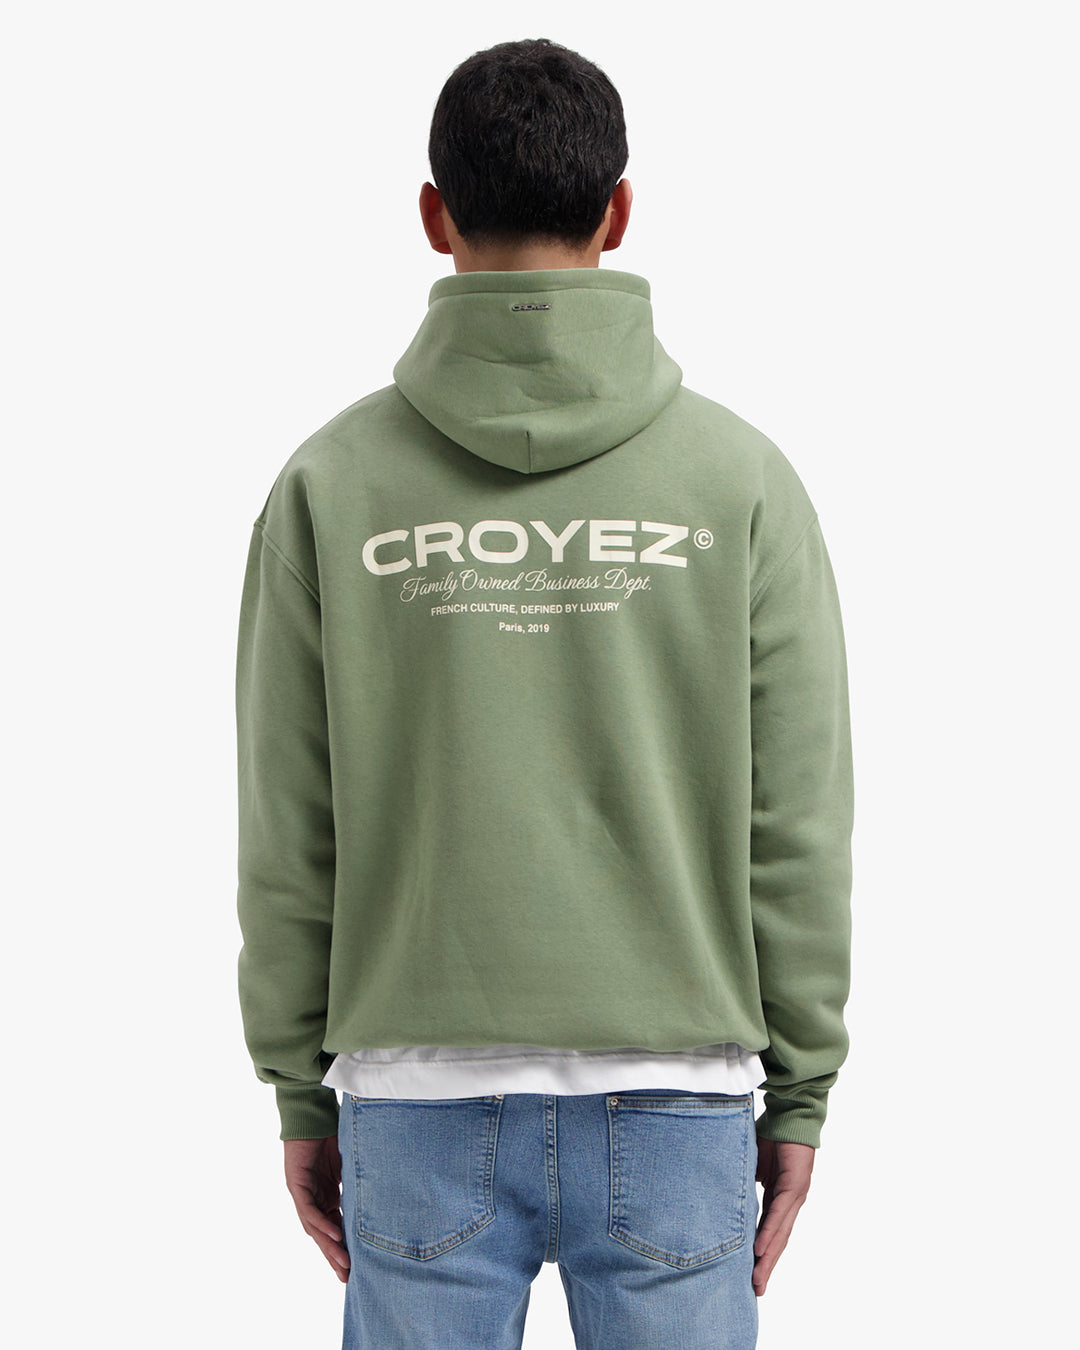 Croyez Family Owned Business Hoodie